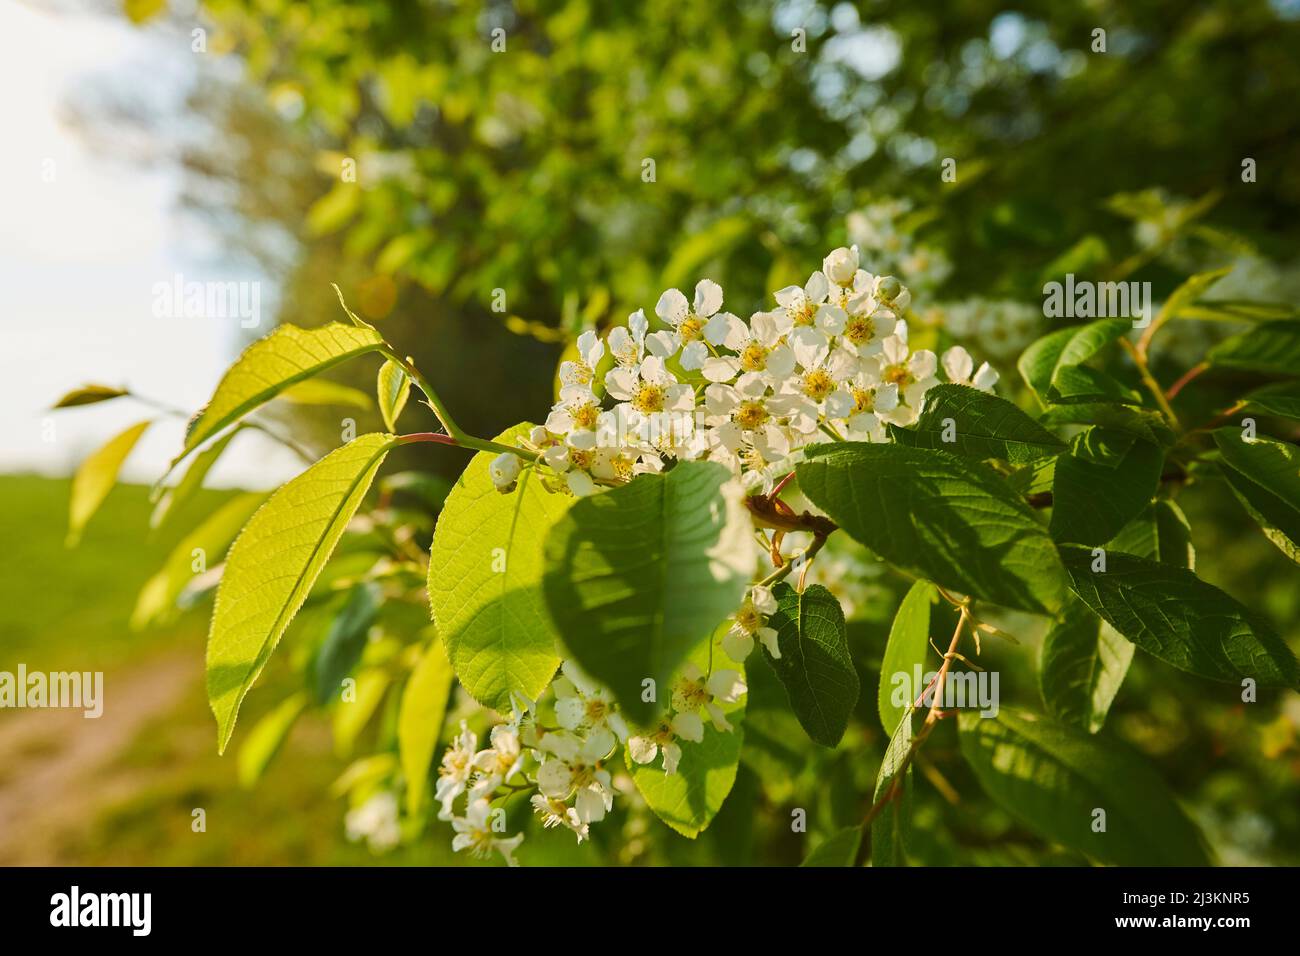 Close-up of flower blossoms and leaves on a bird cherry tree (Prunus padus) in a field; Bavaria, Germany Stock Photo